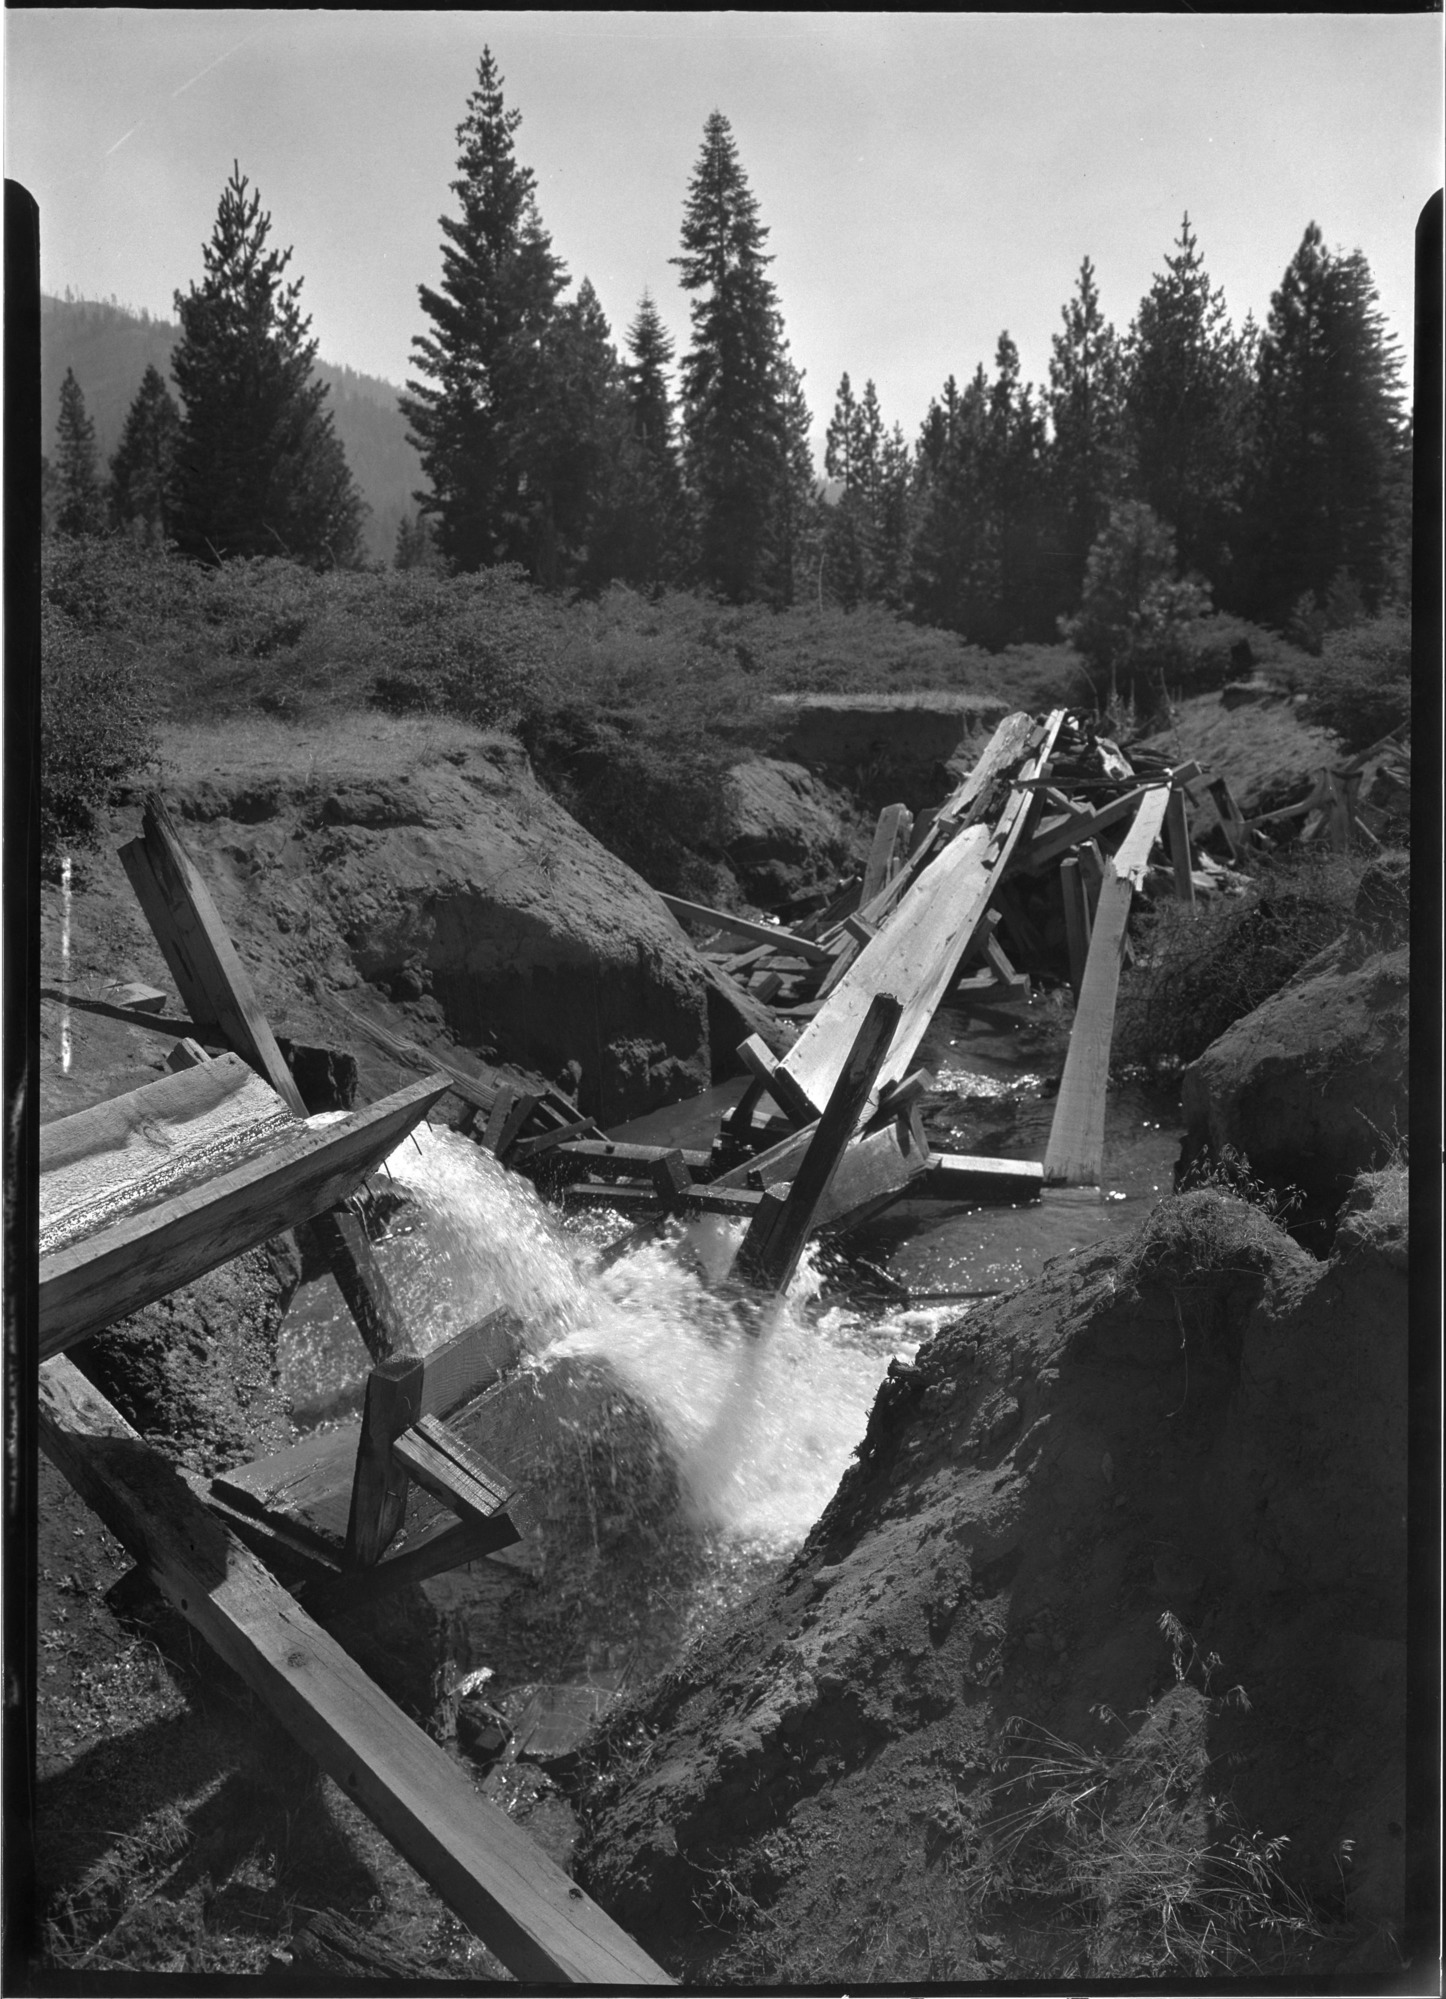 Sugar Pine Lumber Co. flume where it spills into open ditch to flow to the mill.